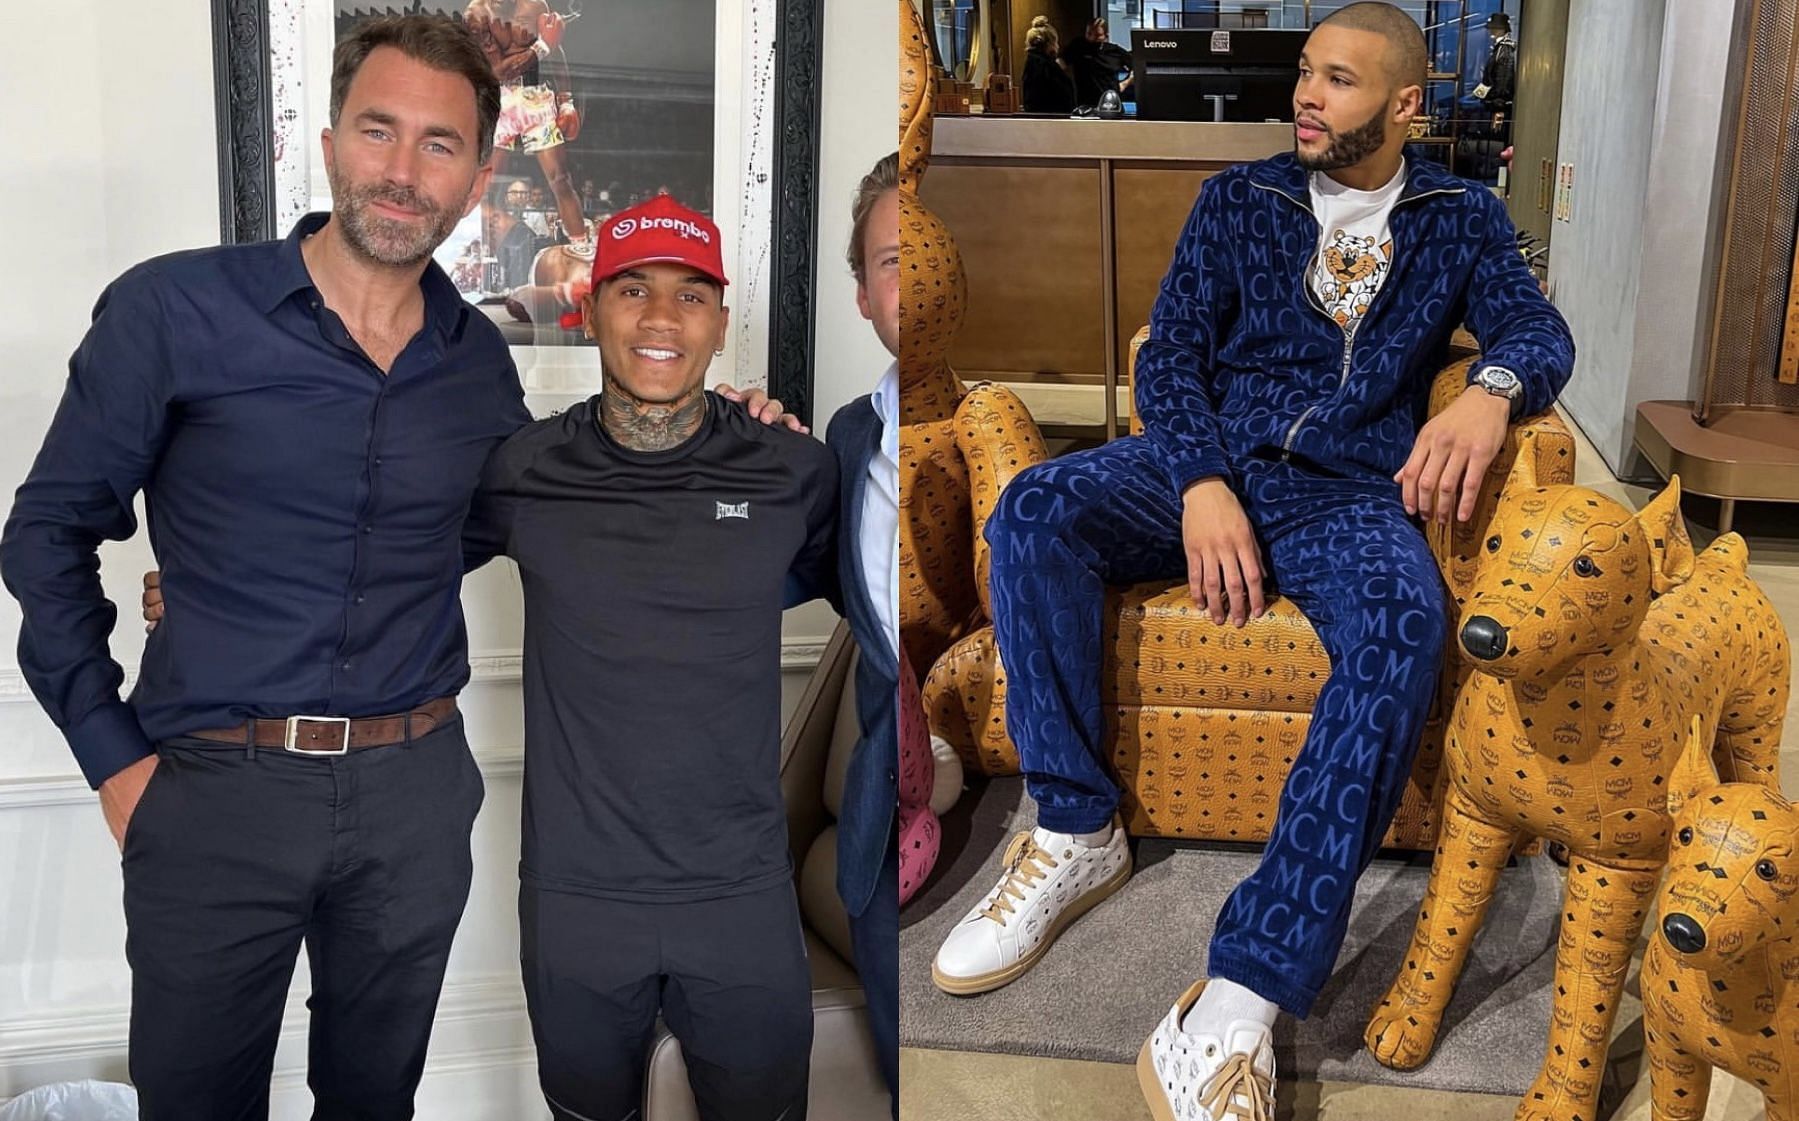 Eddie Hearn and Conor Benn (left), Chris Eubank Jr. (right) [Images via @conorbennofficial and @chriseubankjr on Instagram]